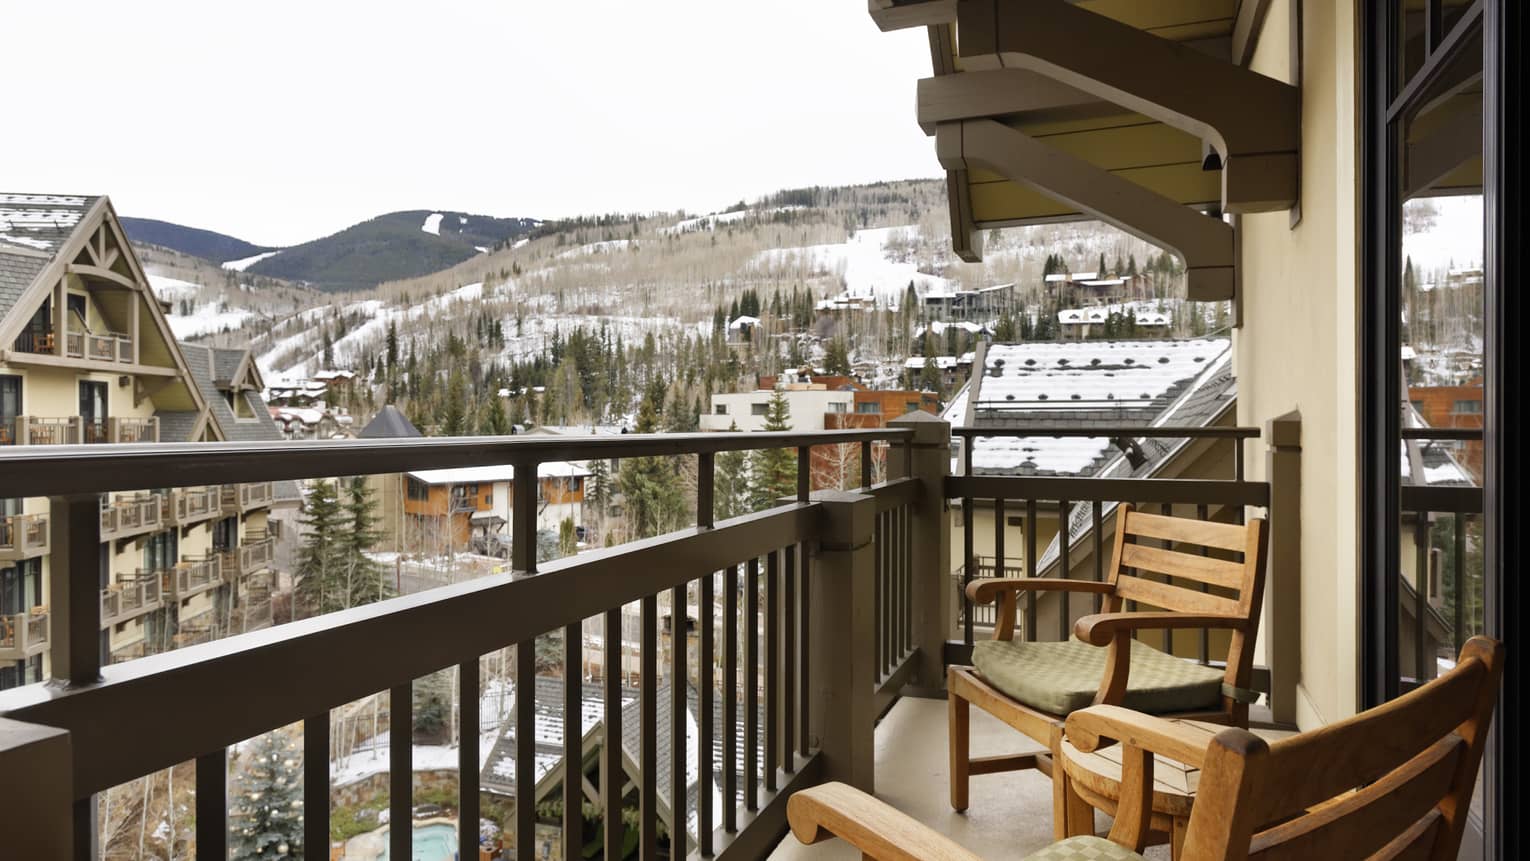 Outdoor balcony with two wooden chairs, overlooking Four Seasons Vail and mountains